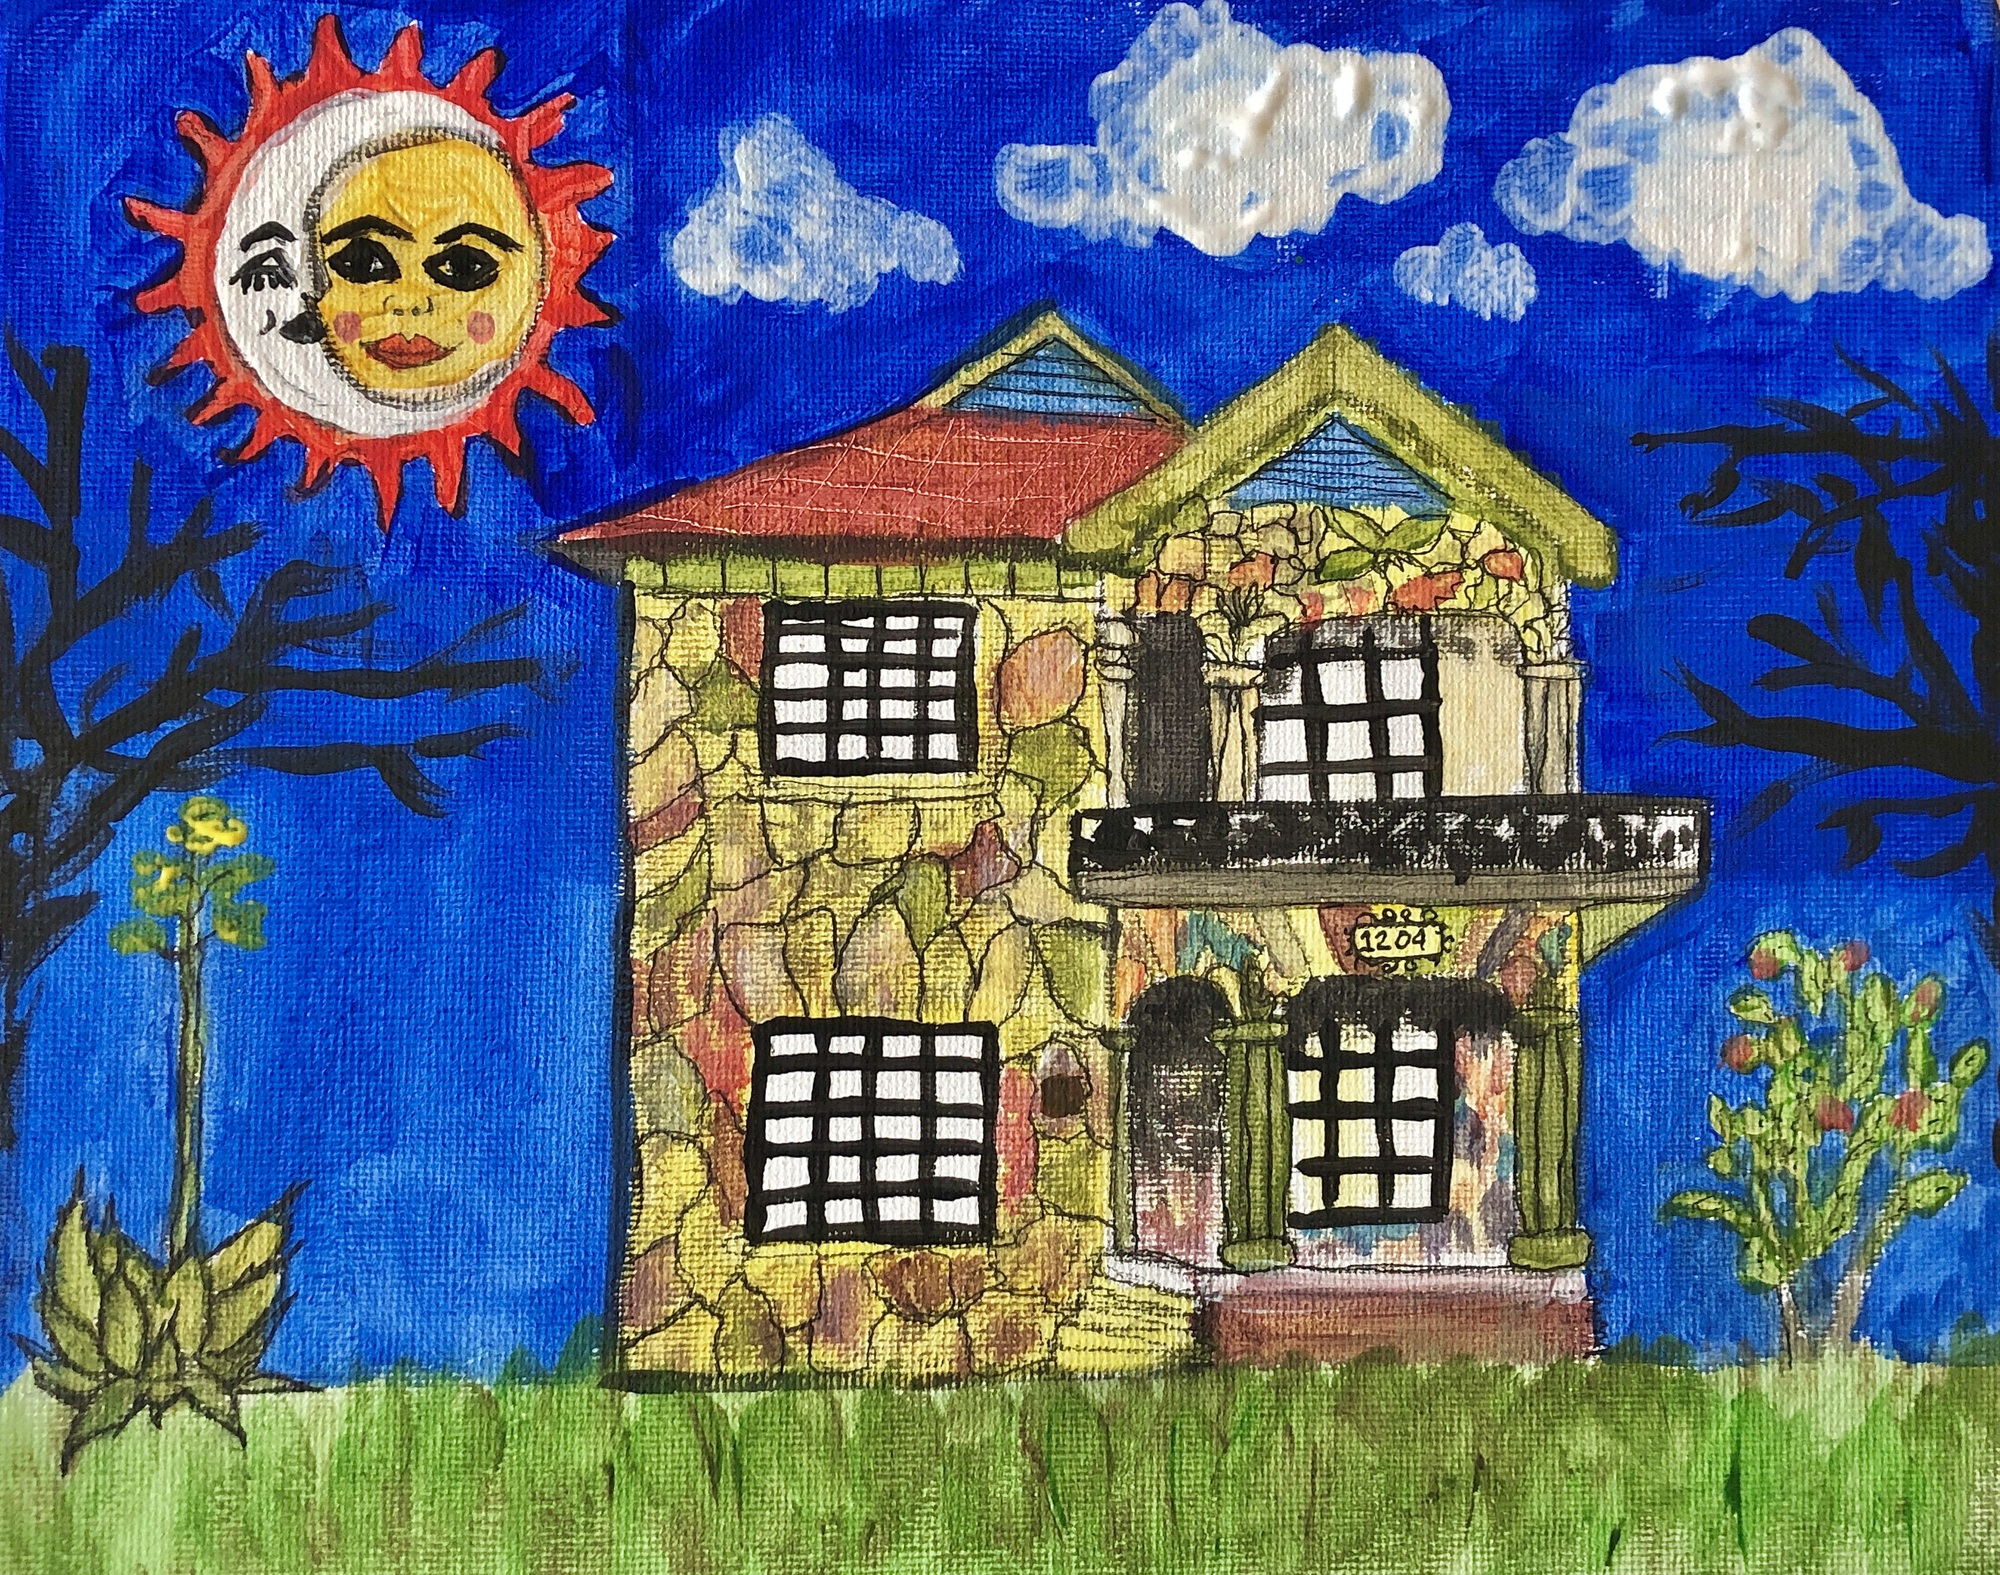 Watercolor painting of a colorful house with rocks of different colors and big windows. There are trees and different vegetation surrounding the house. There is also a sun and moon together, with smiling faces.